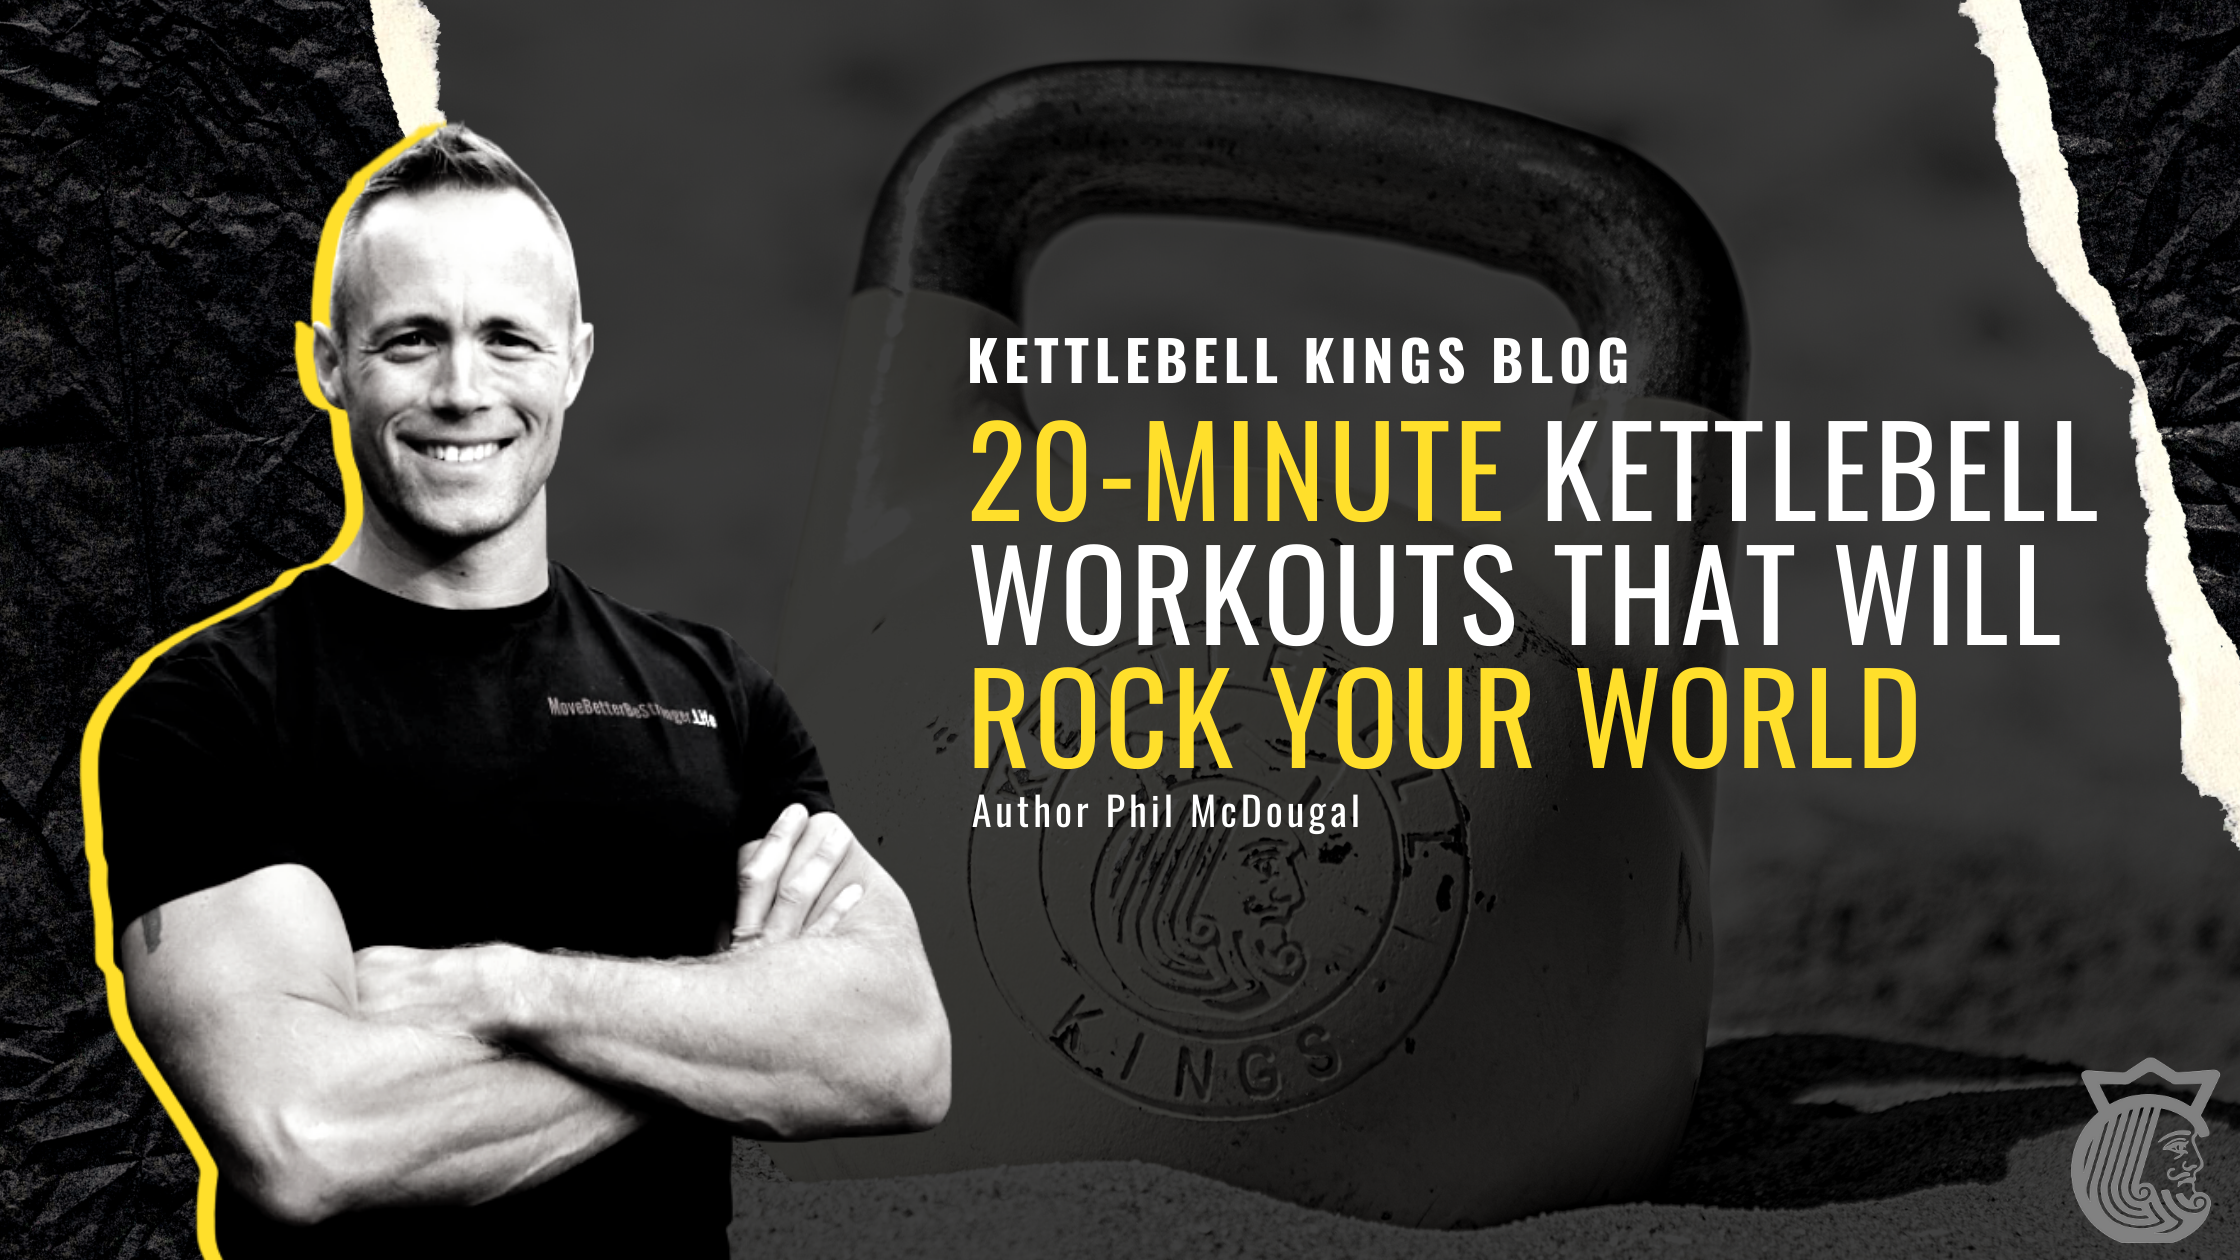 20-Minute Kettlebell Workouts That Will Rock Your